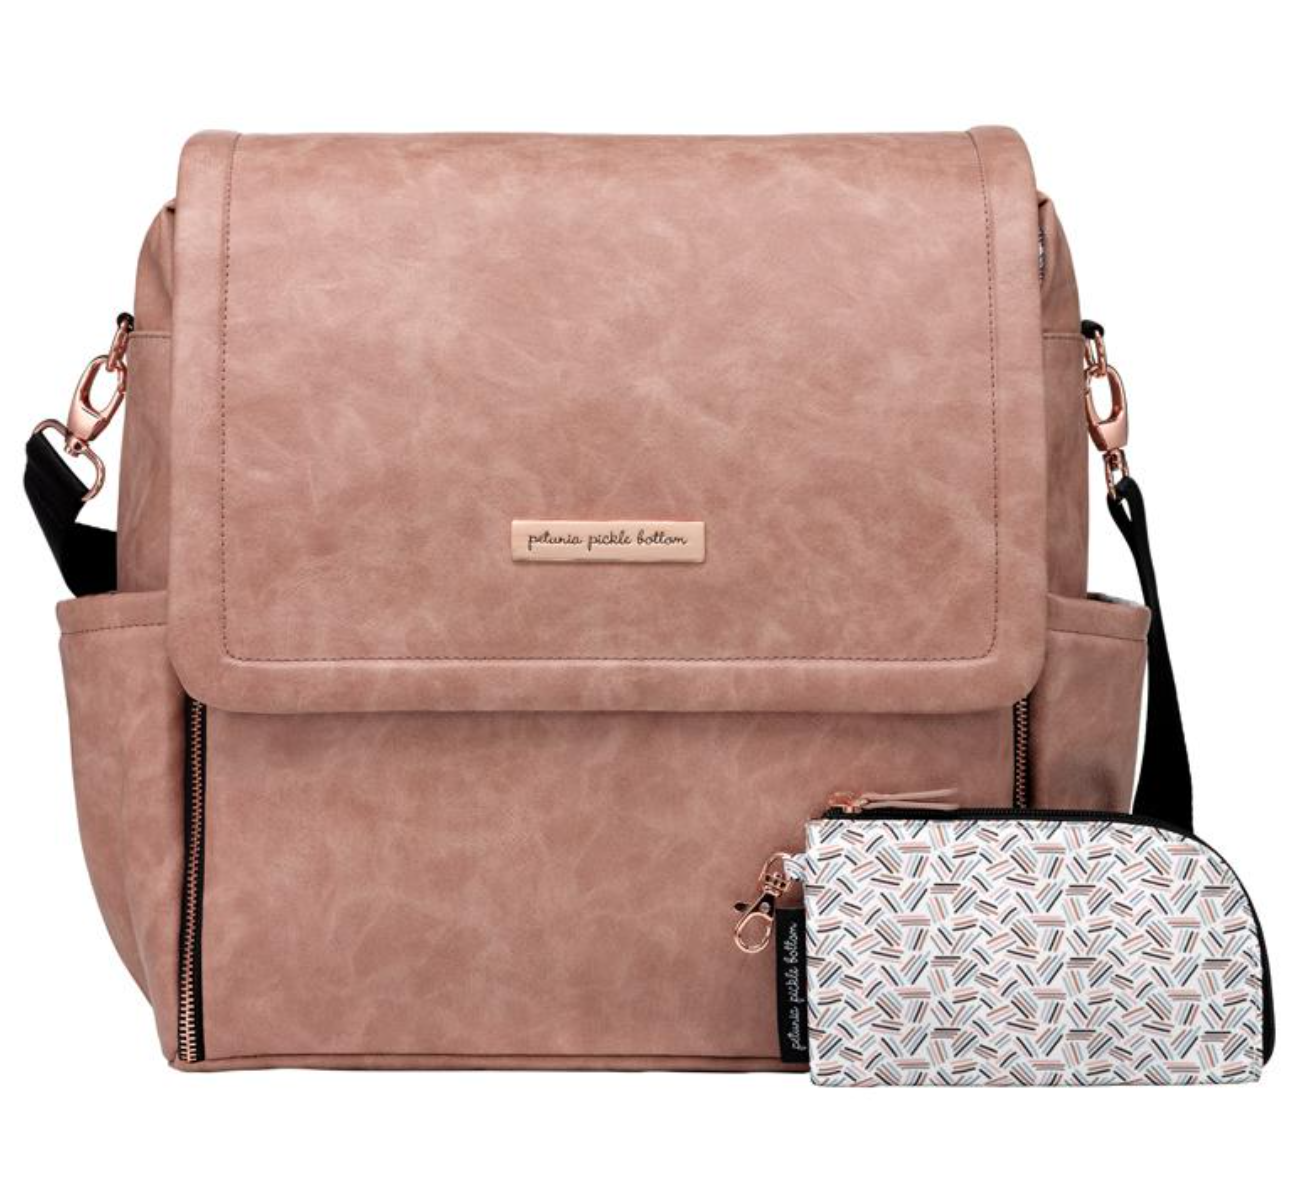 Boxy Backpack in Dusty Rose Matte Leatherette